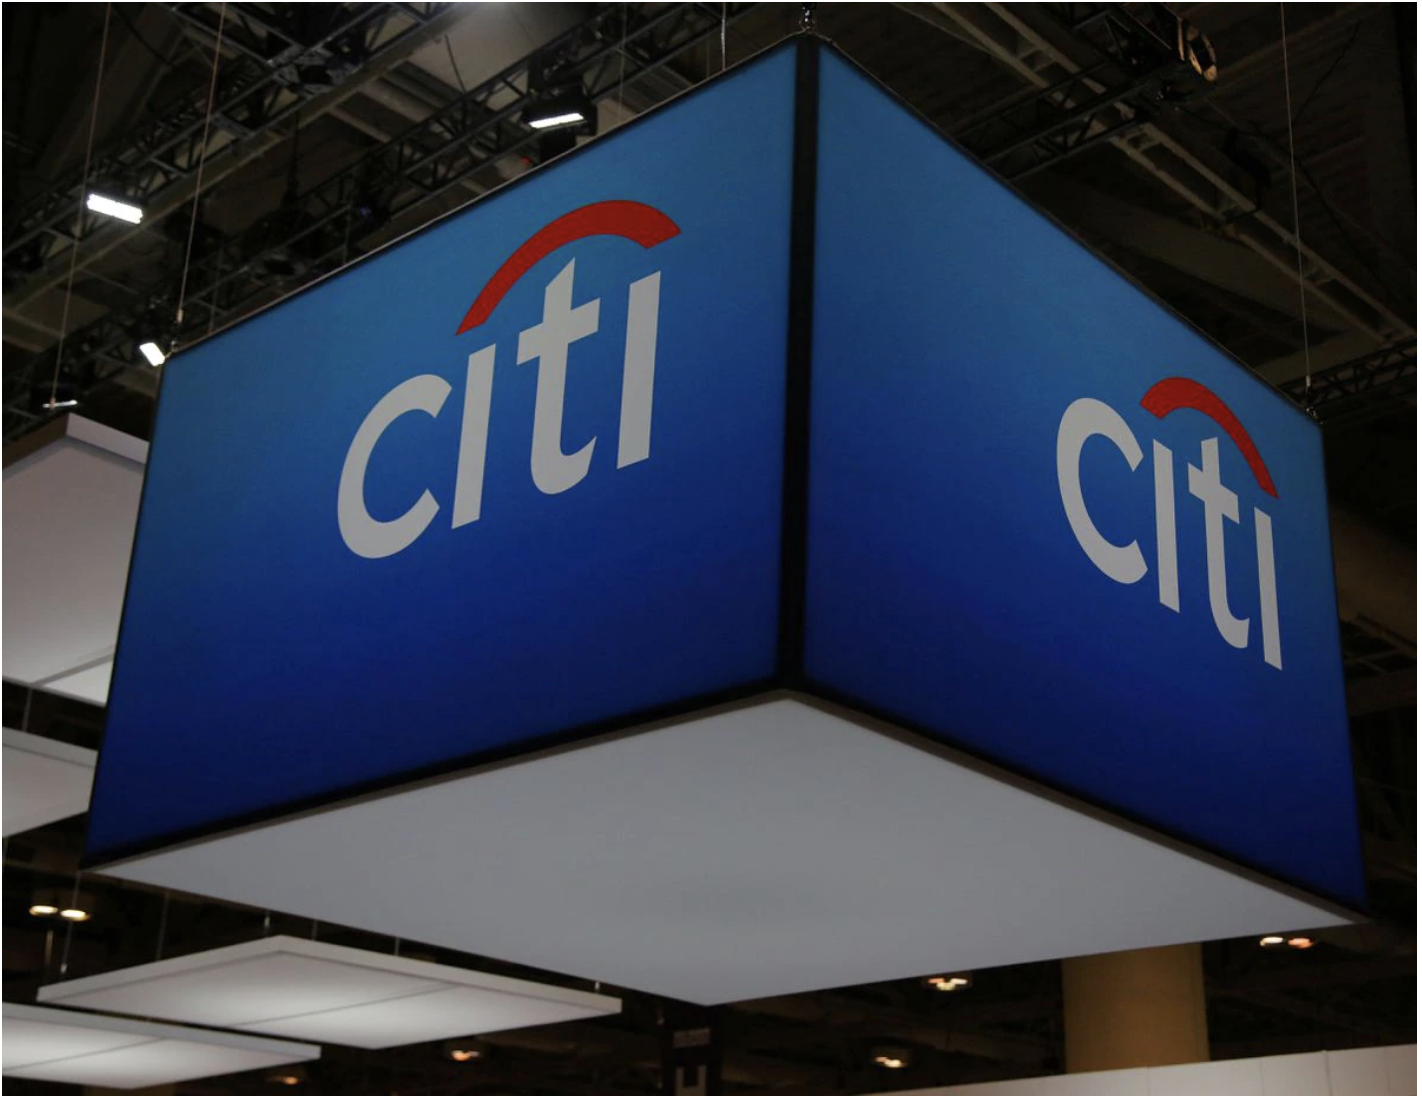 Bank regulators tell Citigroup to take urgent action to fix resolution plan